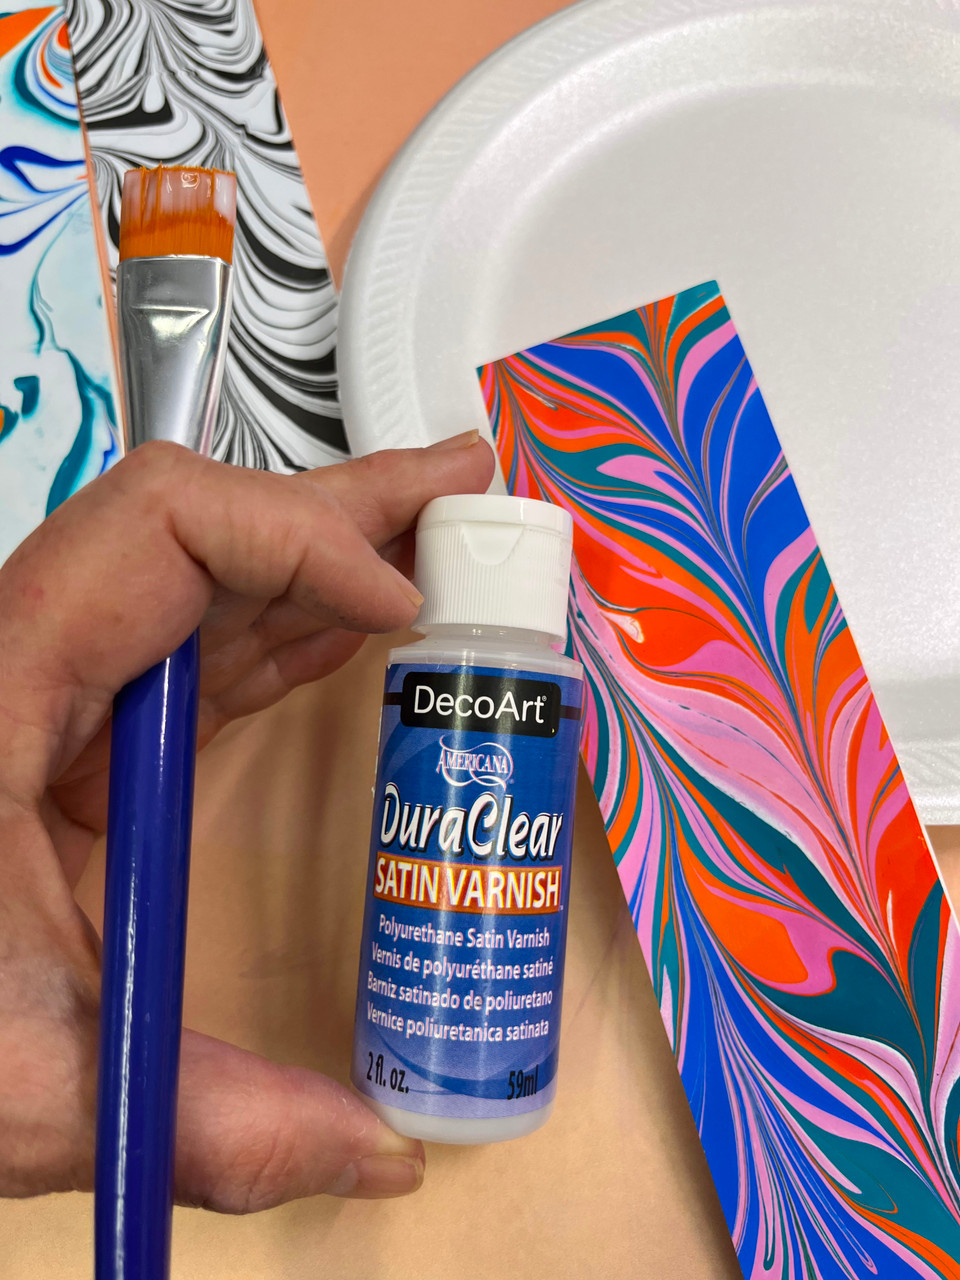 how to cure duraclear gloss varnish｜TikTok Search